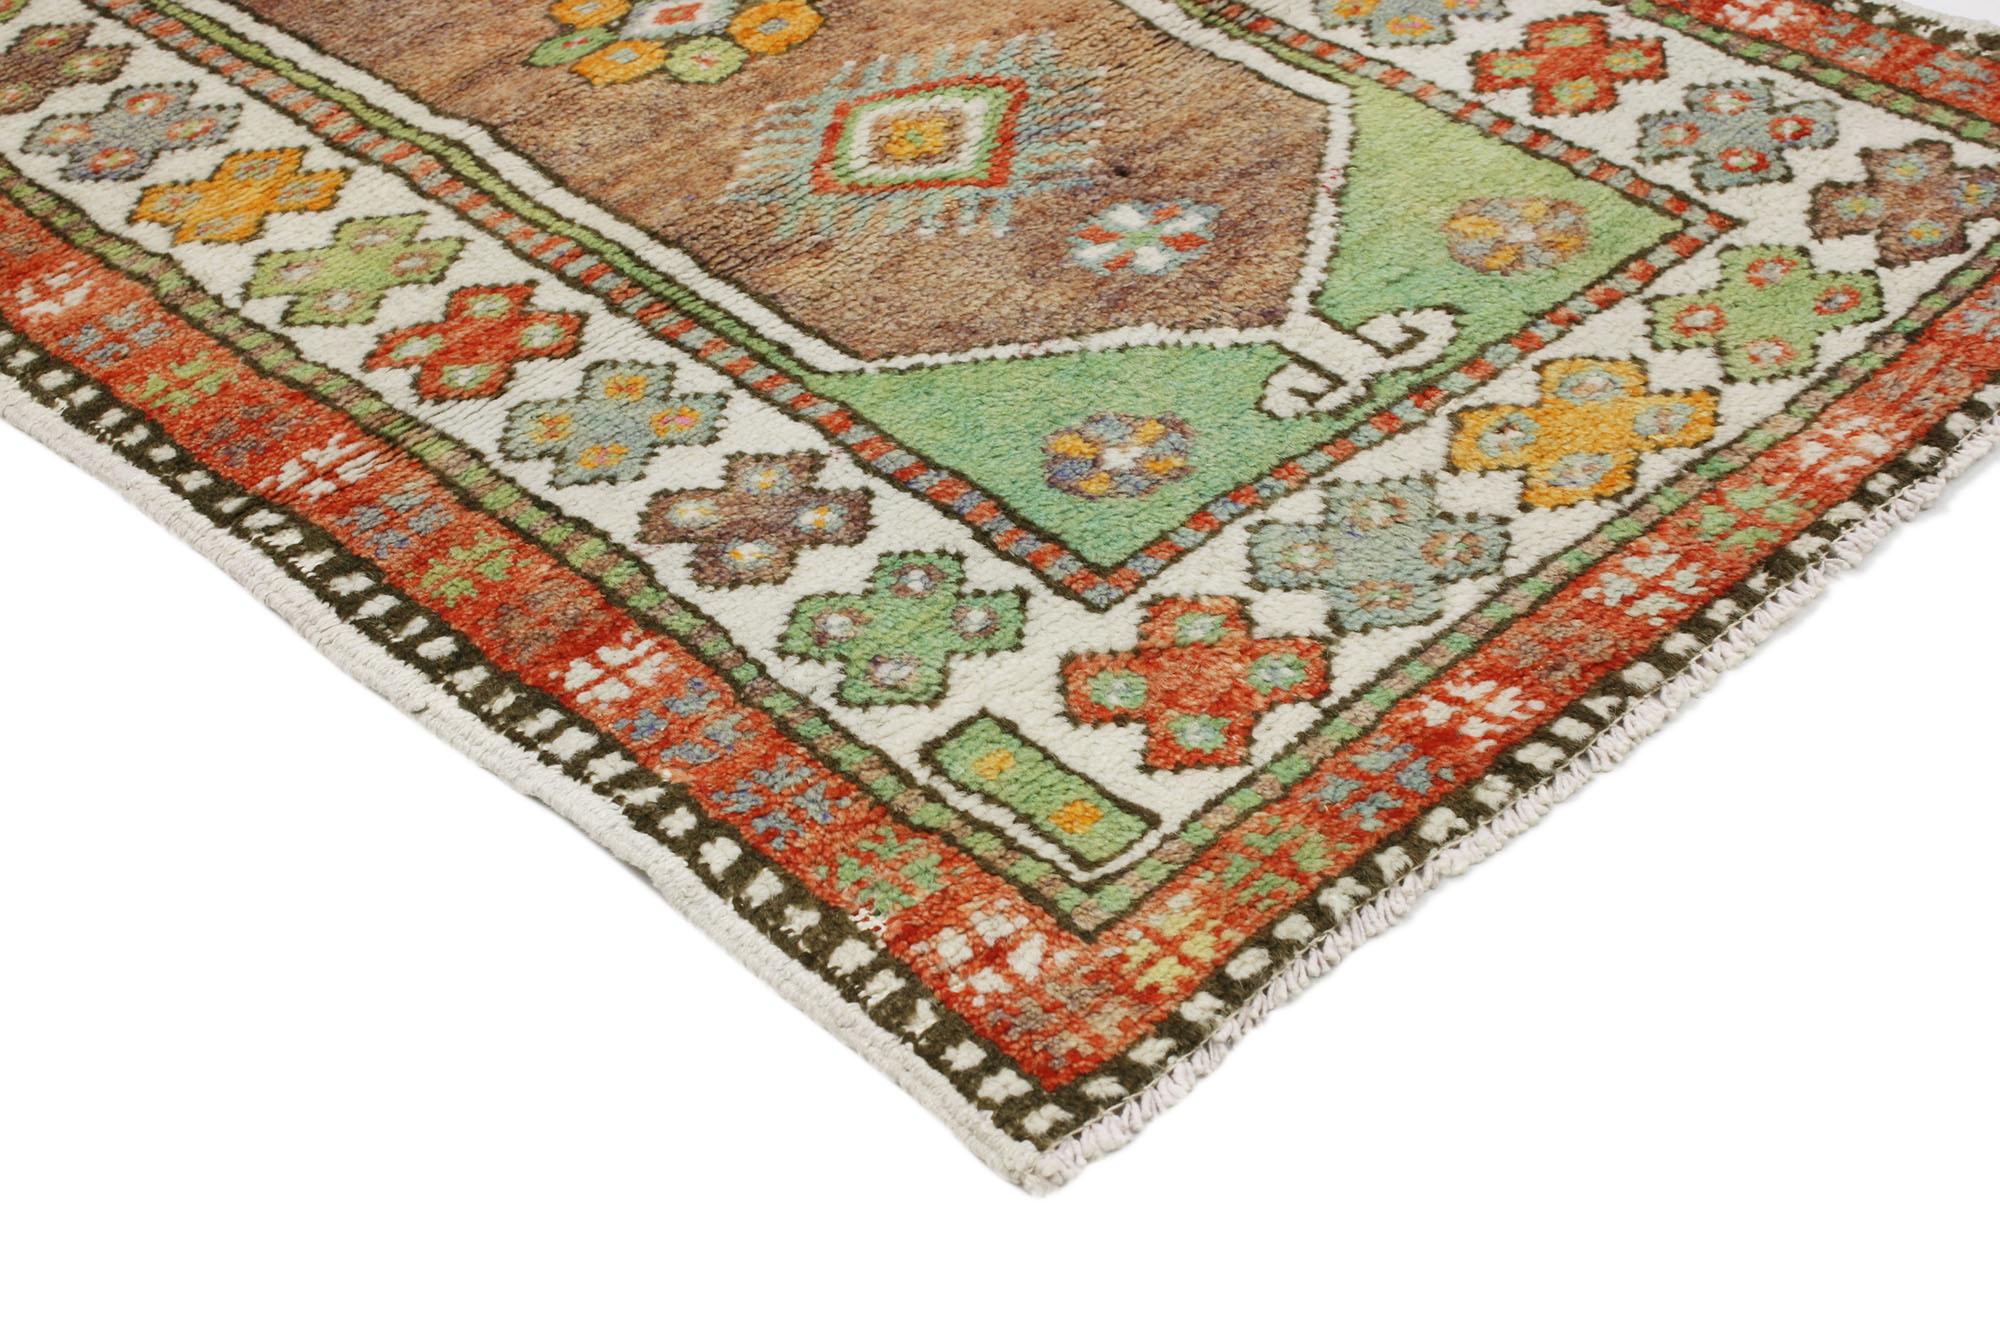 51766 Vintage Turkish Oushak Rug, 02'06 x 04'00.
Colorfully curated meets whimsical boho in this vintage colorful Oushak rug. The eye-catching tribal design and polychromatic colorway woven into this piece work together creating a bold, exotic look.